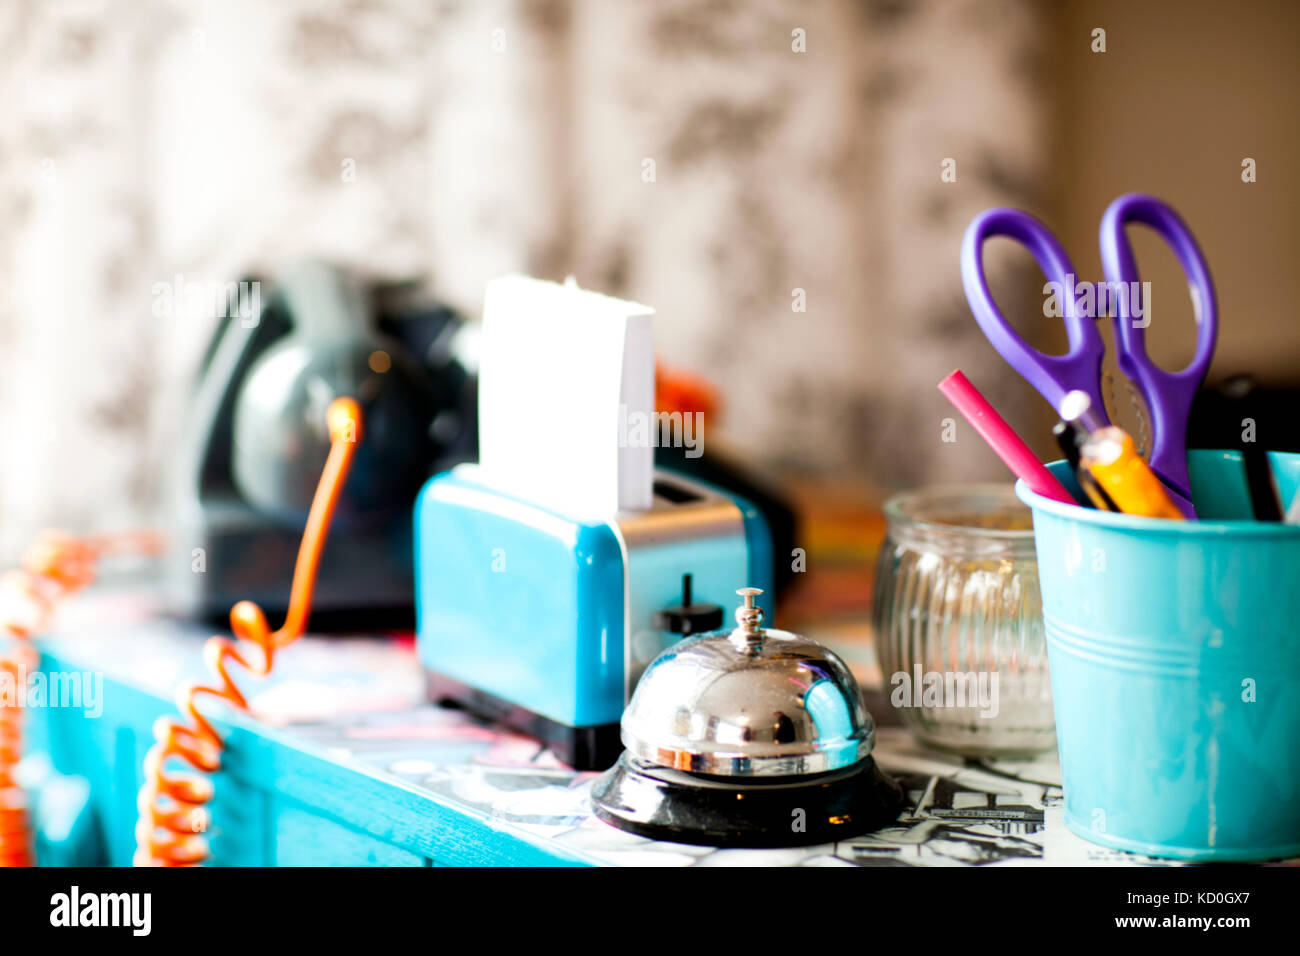 Stationery and service bell on reception desk of quirky hair salon Stock Photo